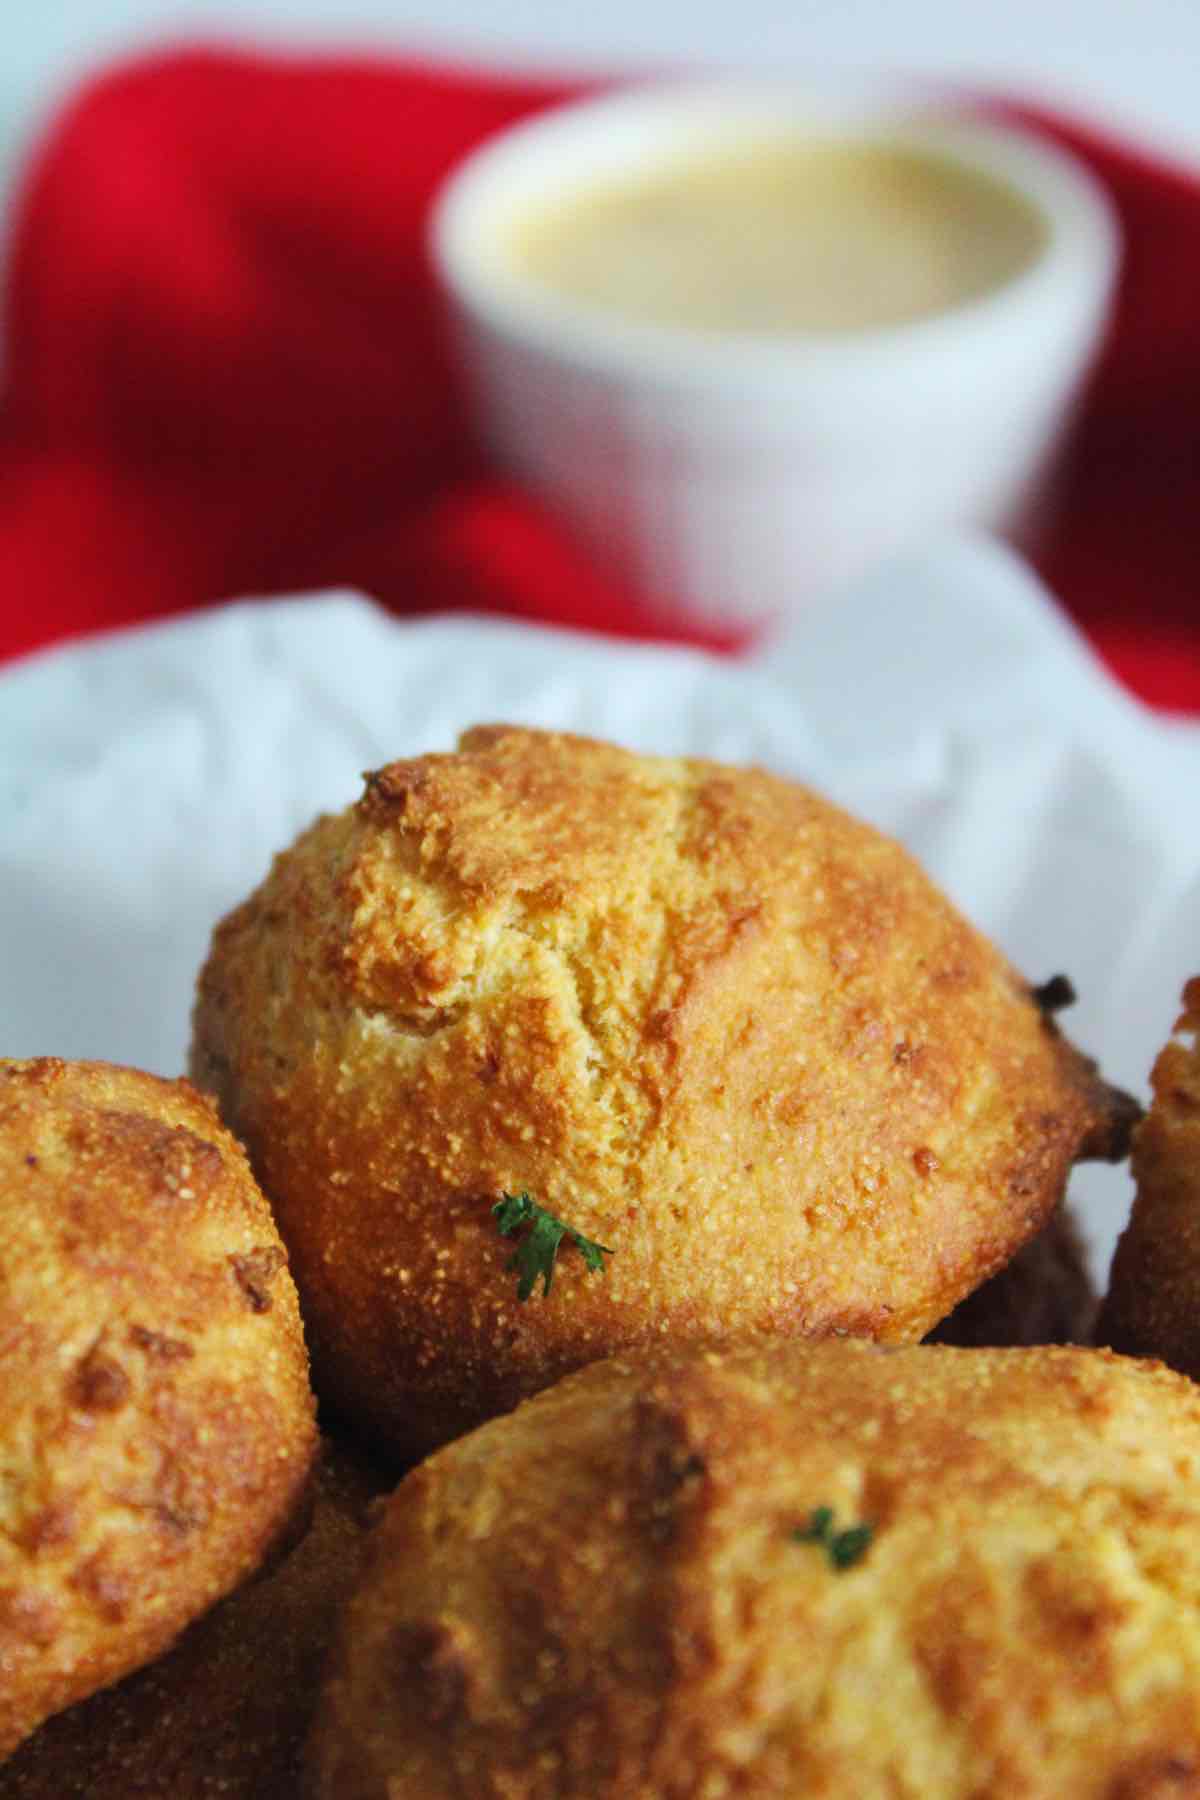 These air fryer hush puppies are made from scratch.